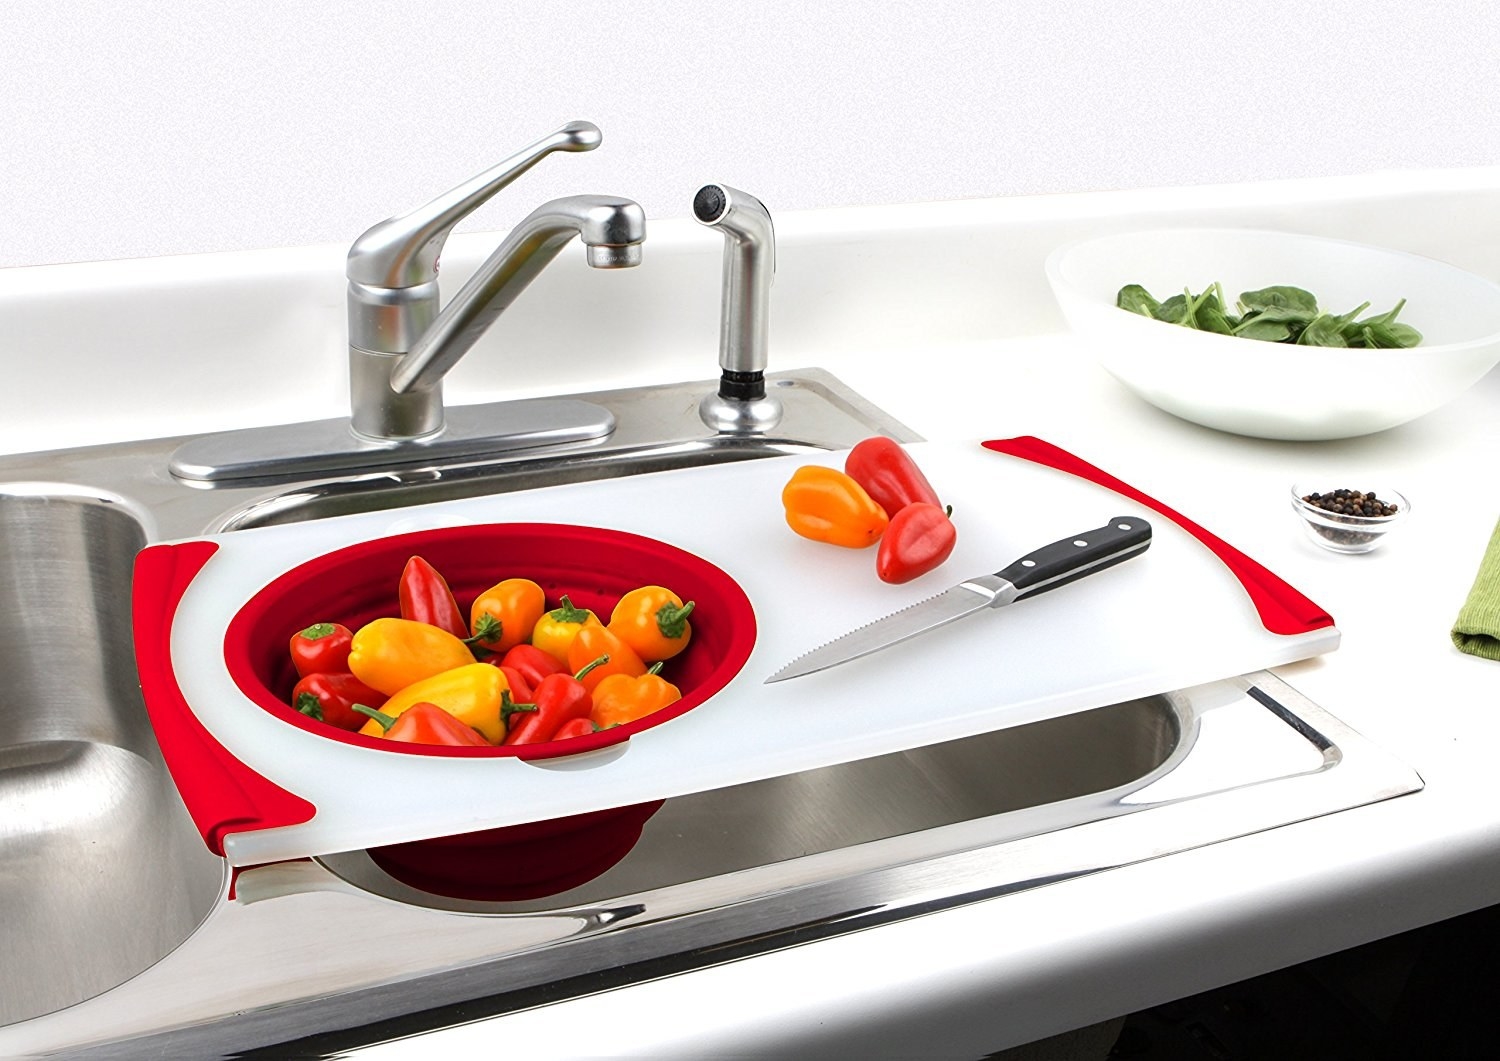 a white cutting board with red accents and a strainer set on one side of it to place over the sink for drainage